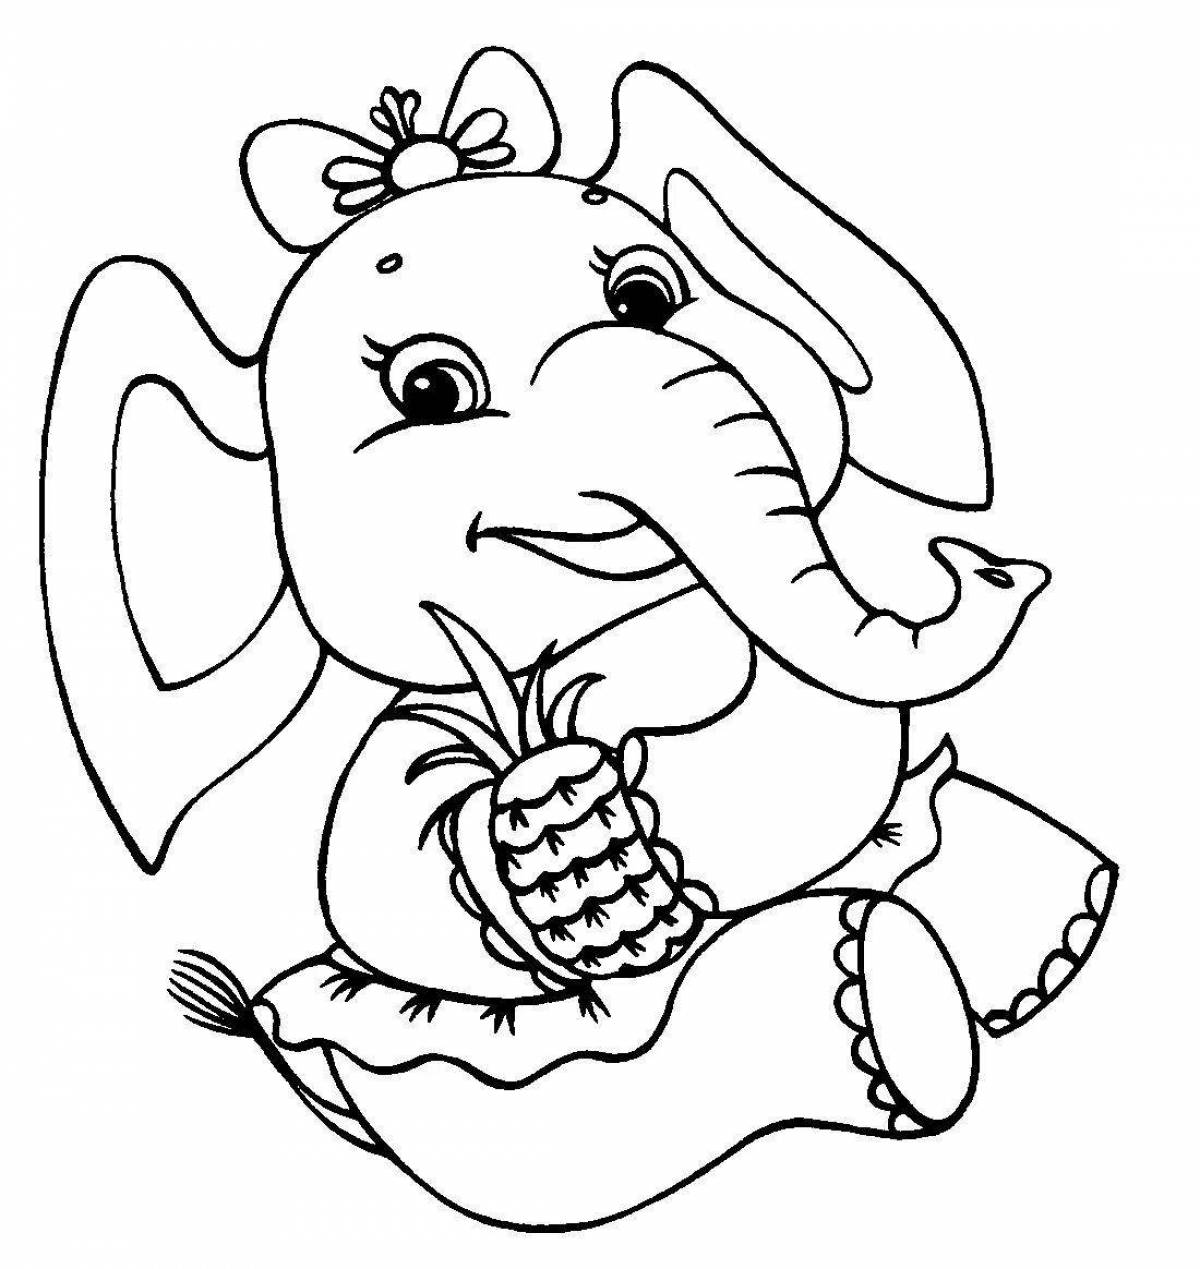 Glowing Elephant coloring book for 3-4 year olds